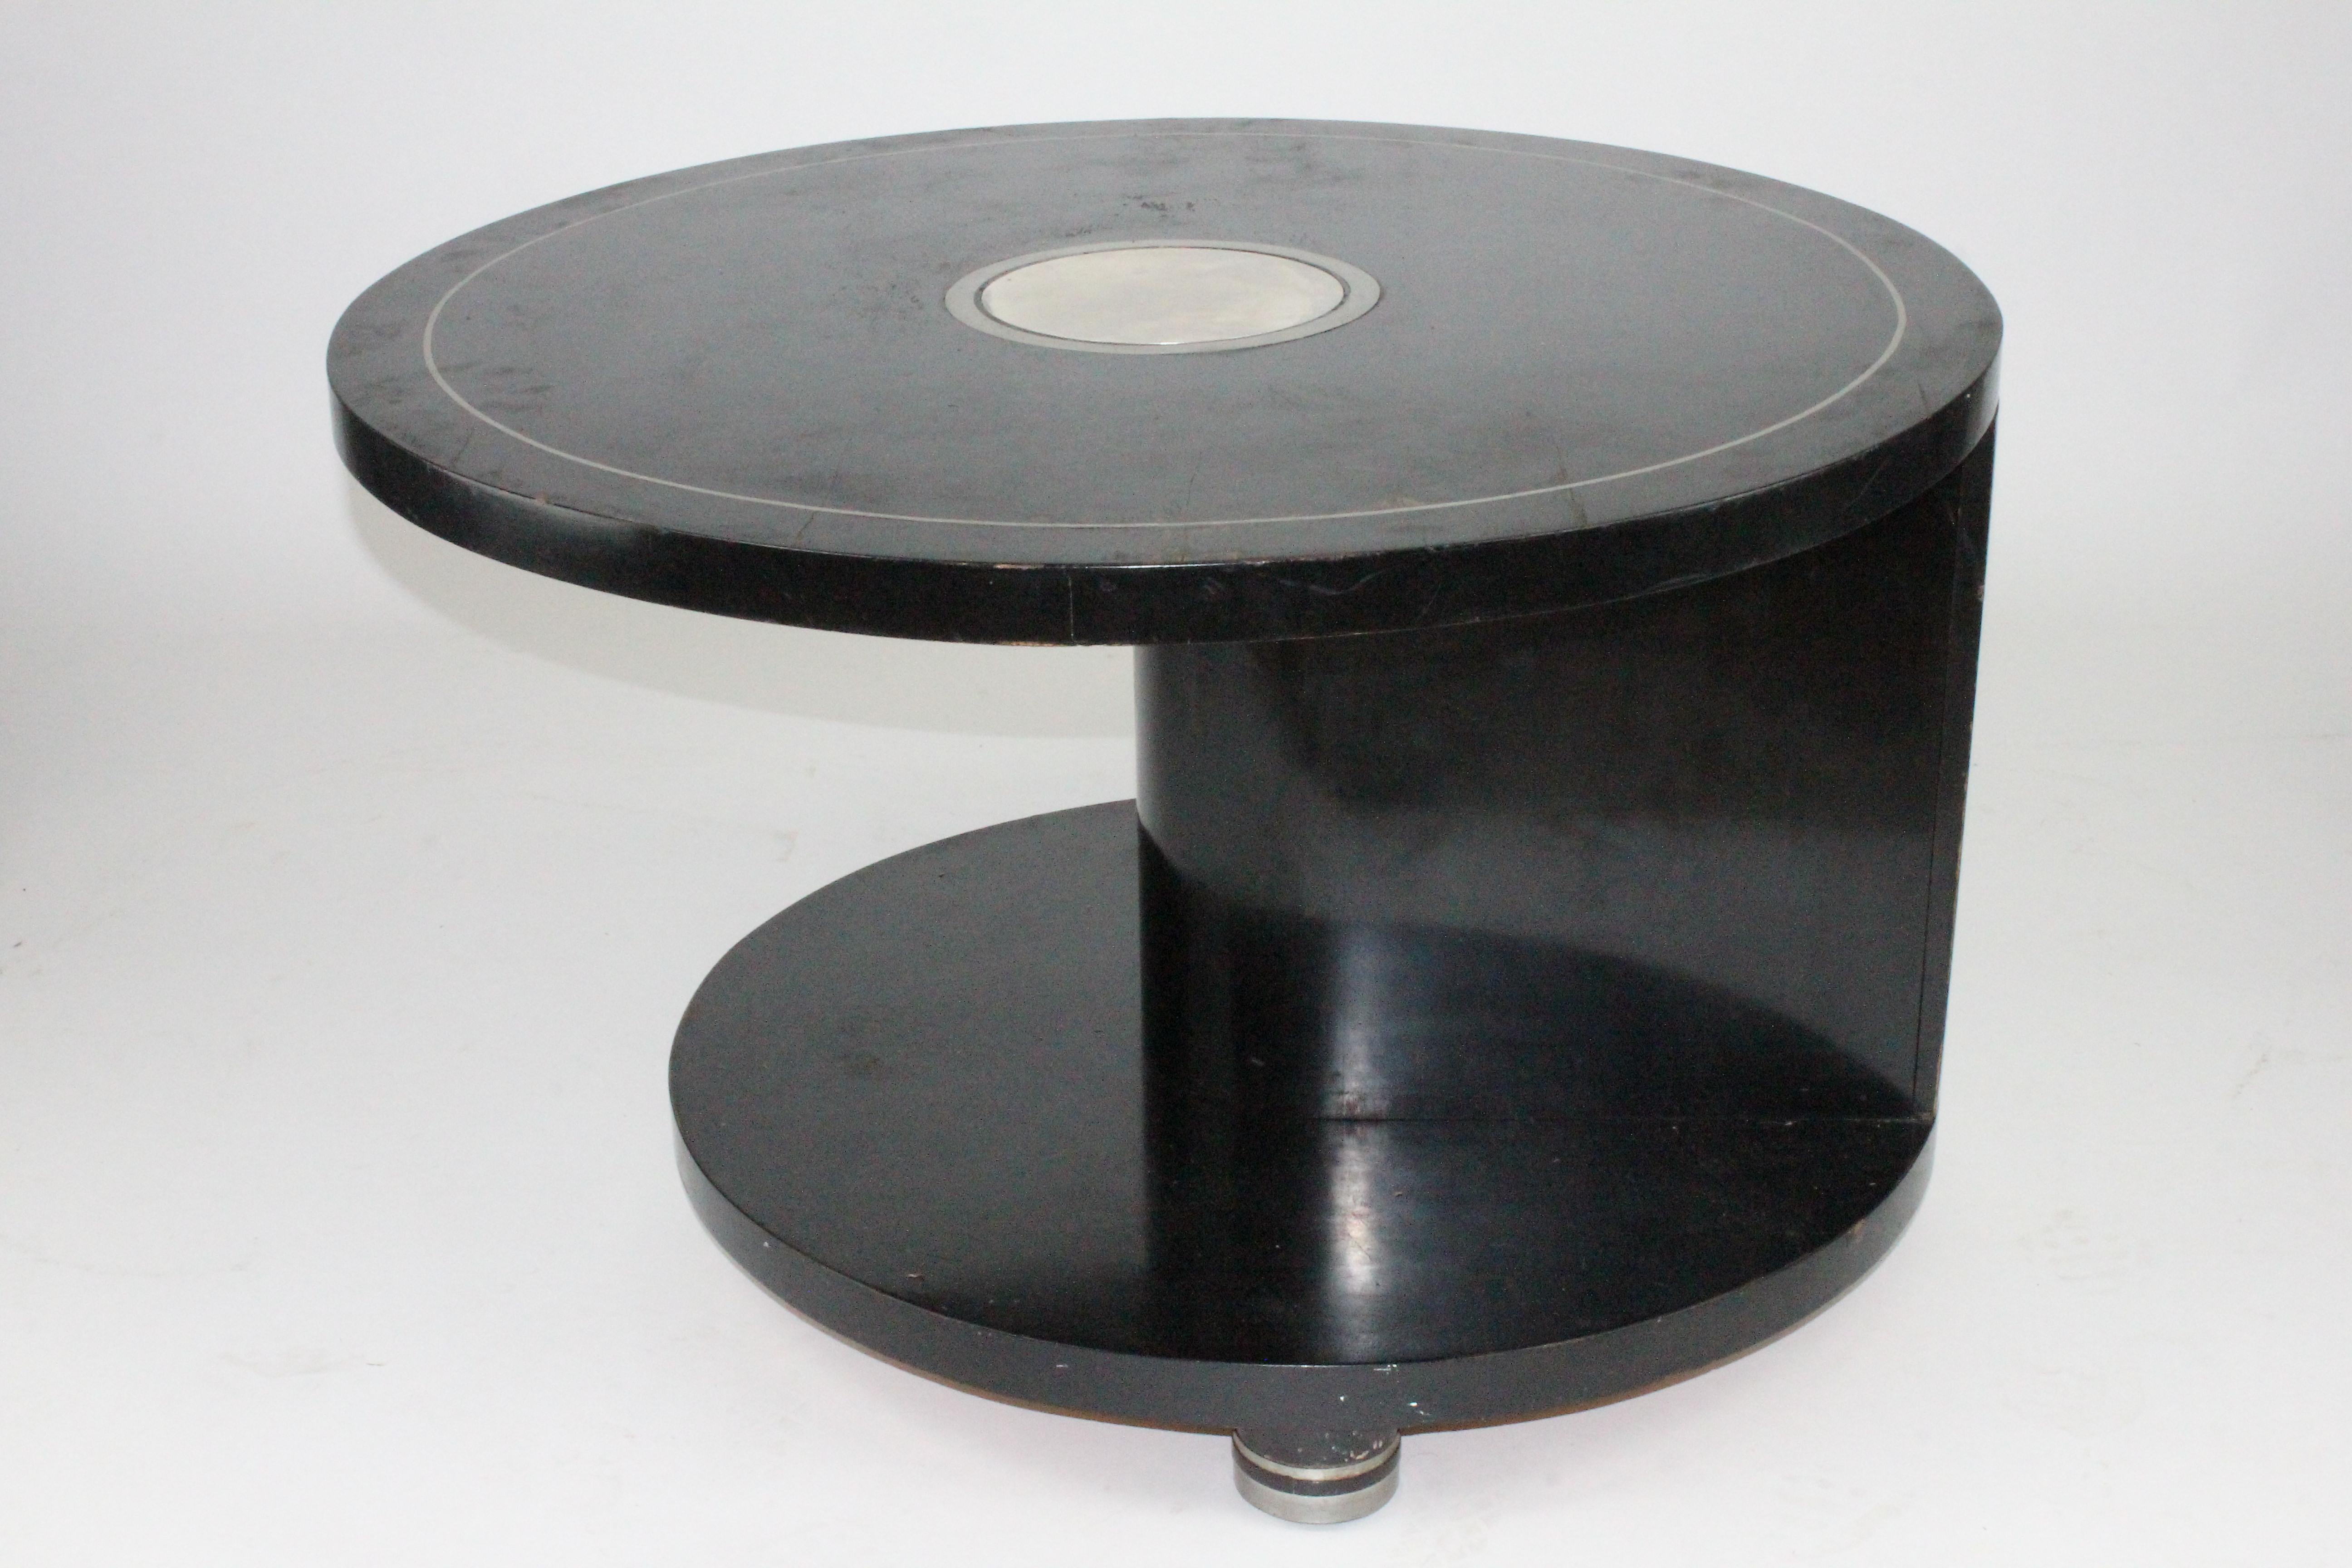 Alvar Andersson Table, 1933, Swedish, Black Painted with Pewter Inlays (Hartzinn)